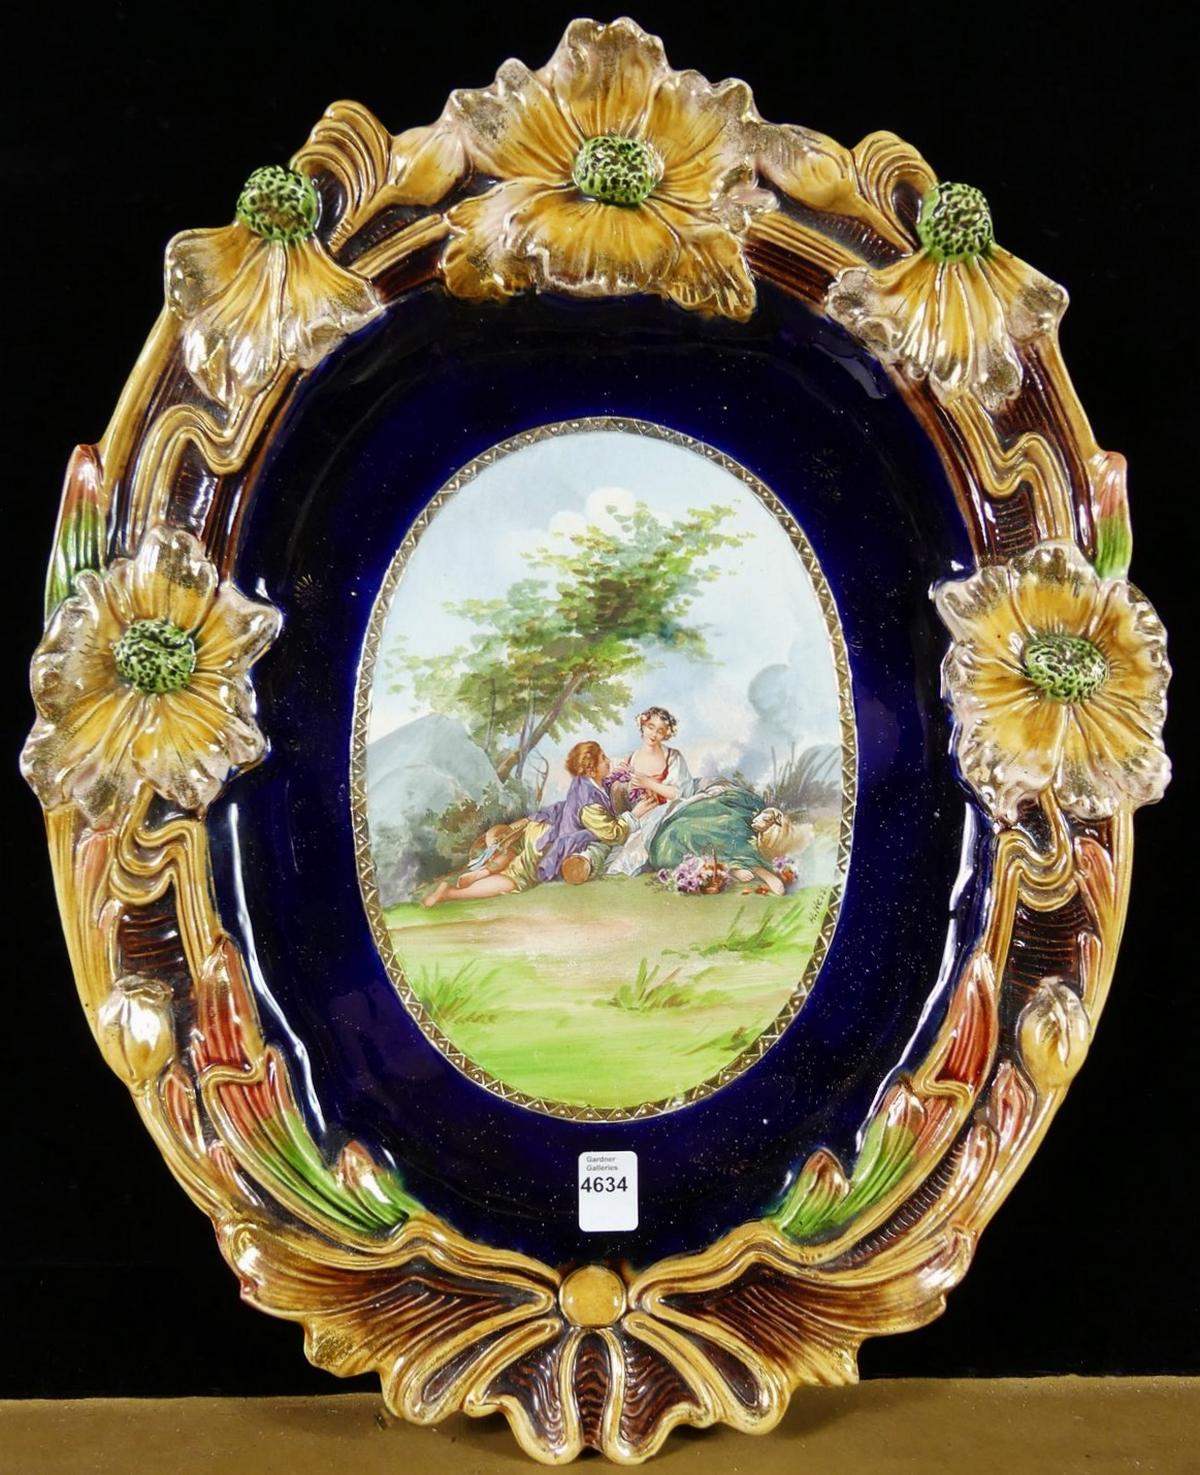 PAINTED TRAY